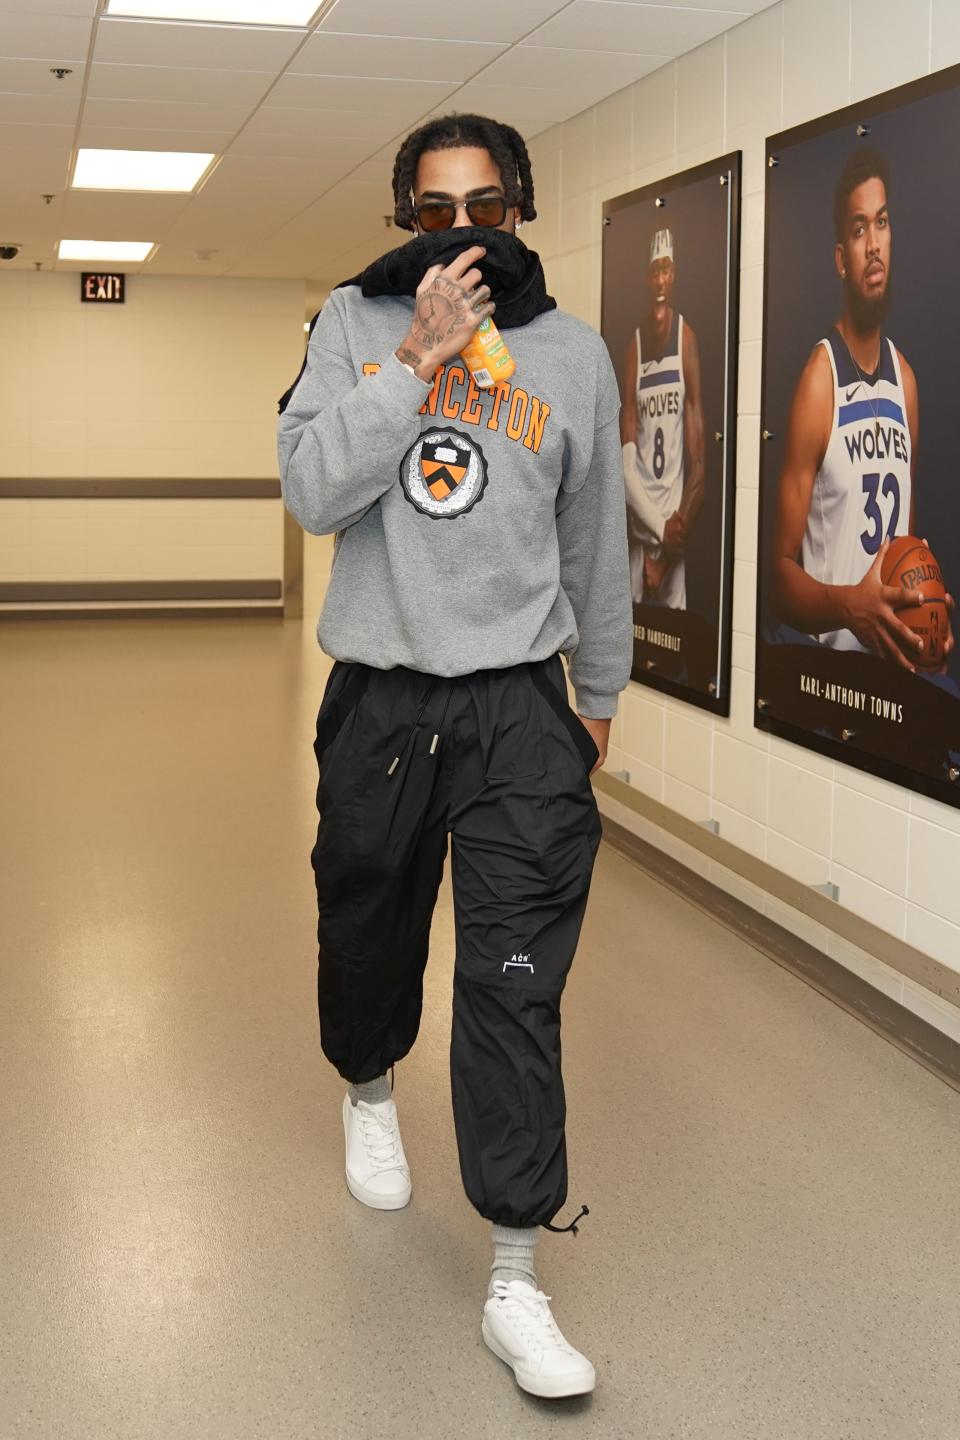 D'Angelo Russell of the Minnesota Timberwolves arrives to a game against the Denver Nuggets in Minneapolis, January 3, 2021.